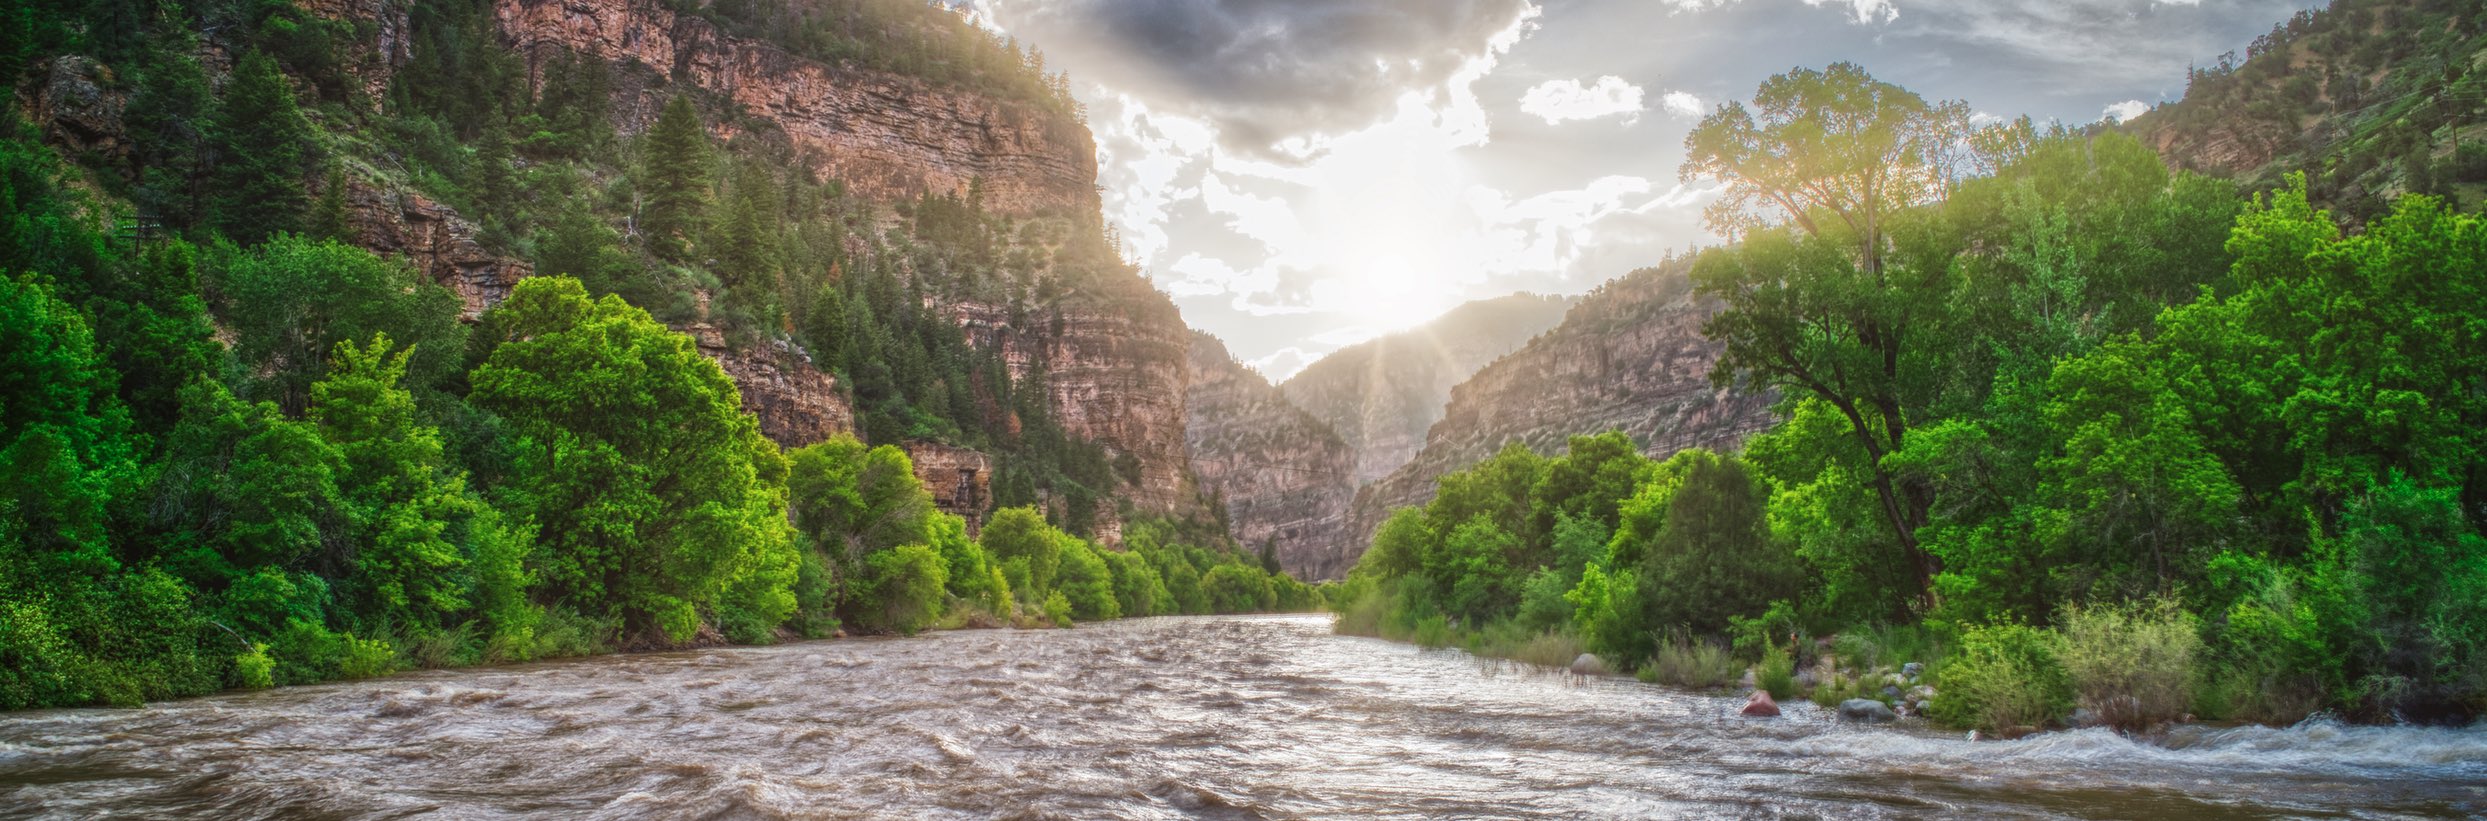 This serene photograph beautifully captures the calm Class II waters of the Colorado River. The surroundings unfold with a perfect view of canyon walls and lush vegetation embracing the river, creating a tranquil and picturesque scene. The radiant sun takes center stage, adding warmth and radiance to the peaceful waterscape.